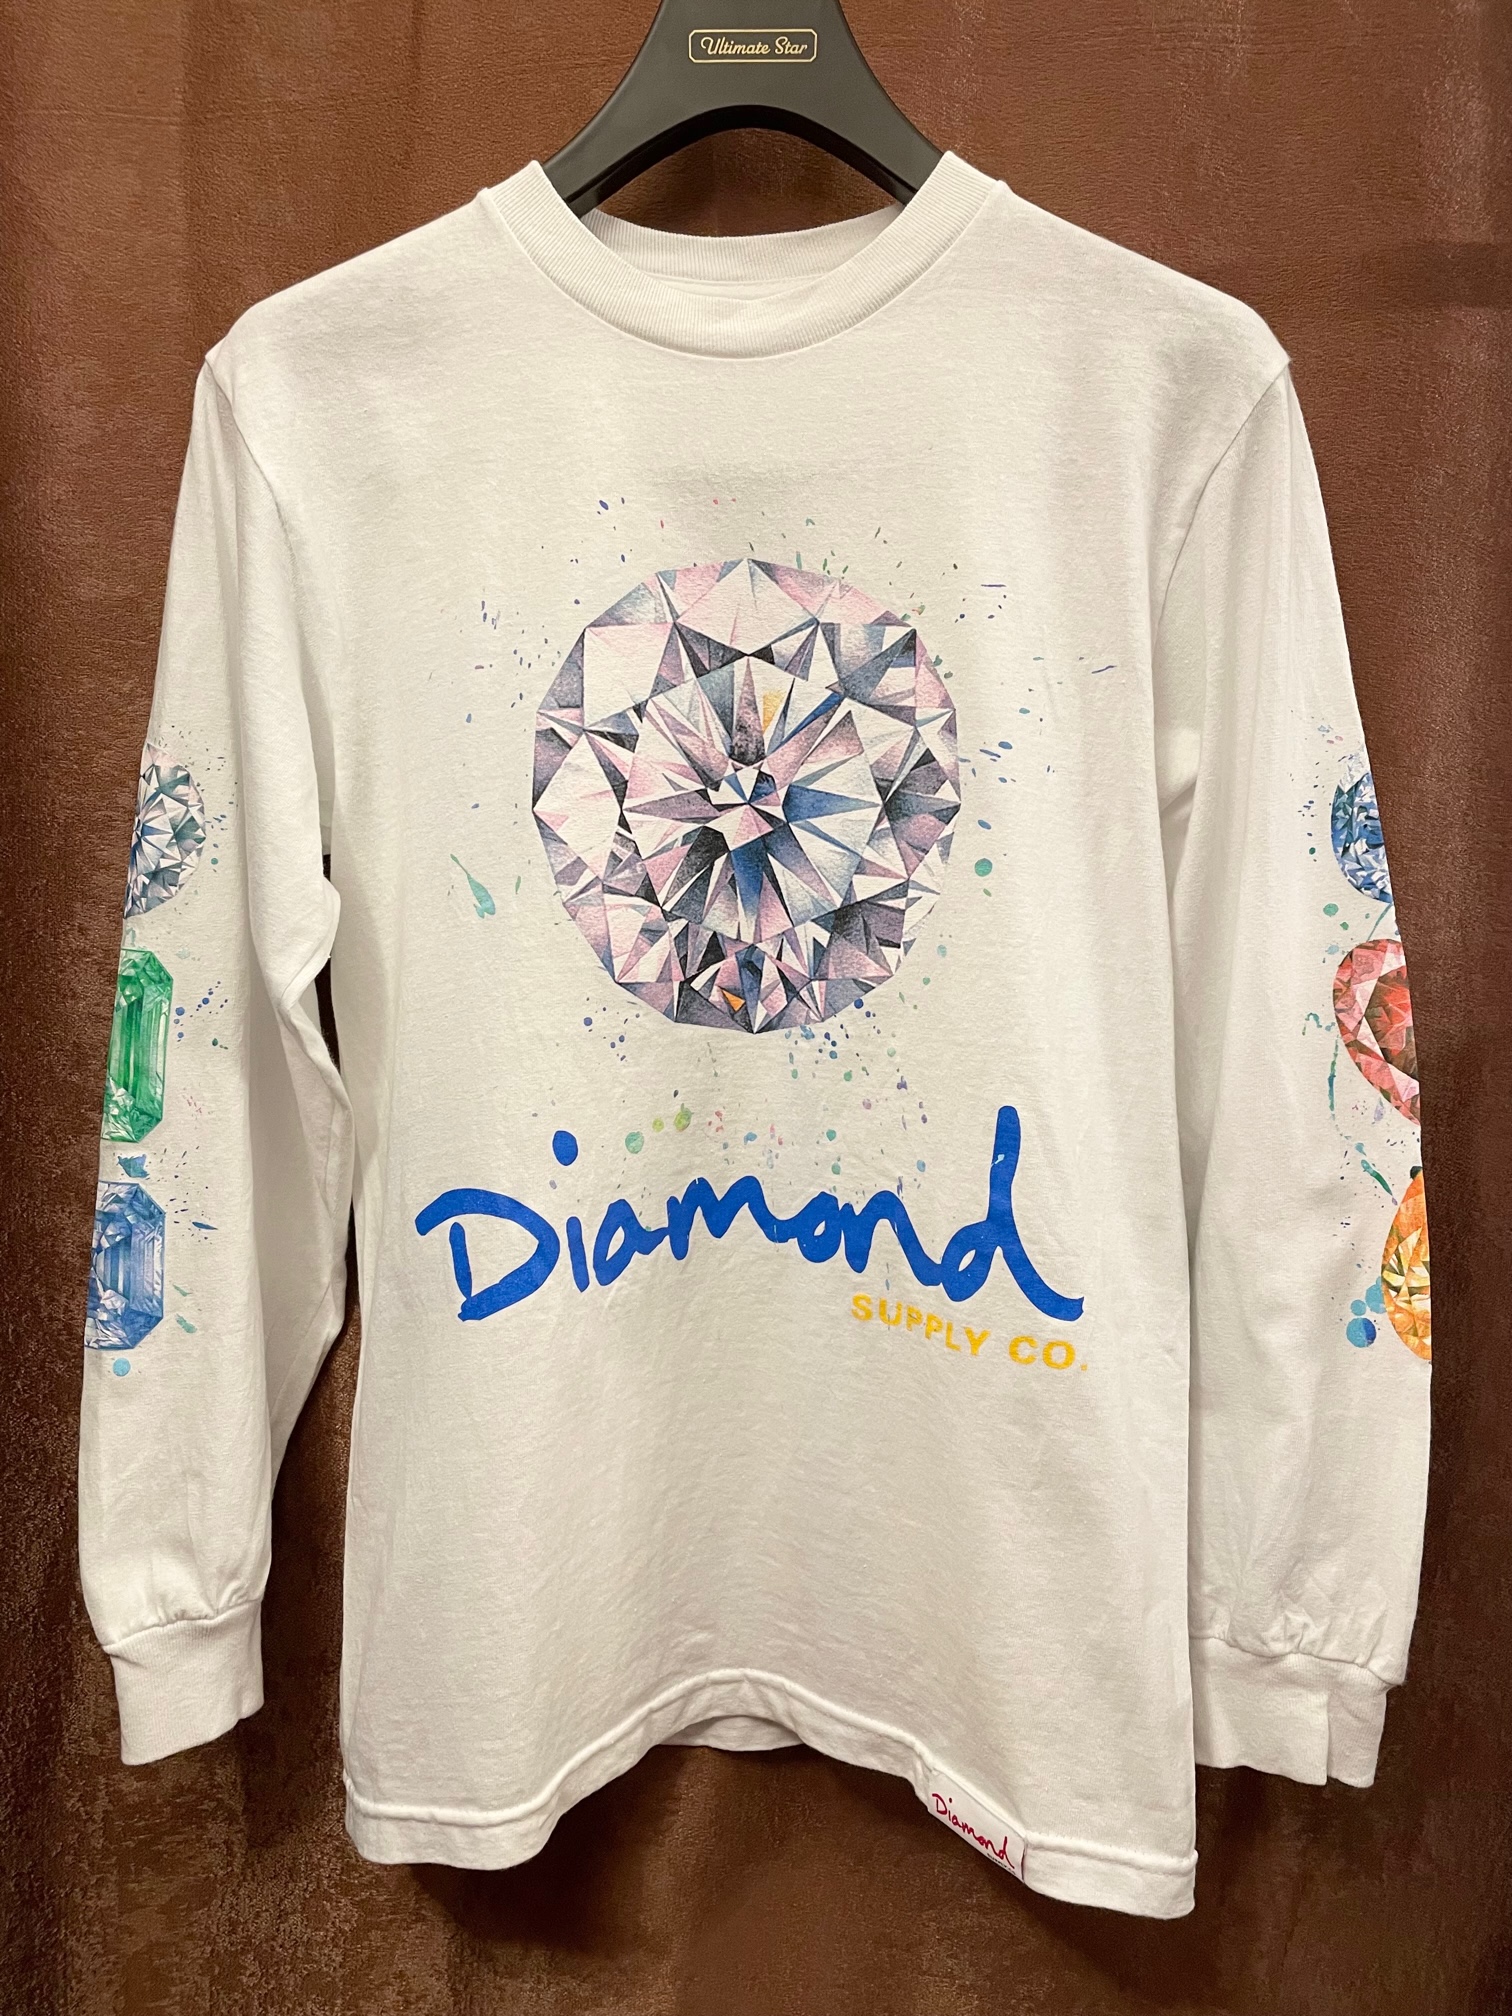 MADE IN MEXICO製 Diamond Supply Co. 長袖プリントTシャツ ホワイト S ...